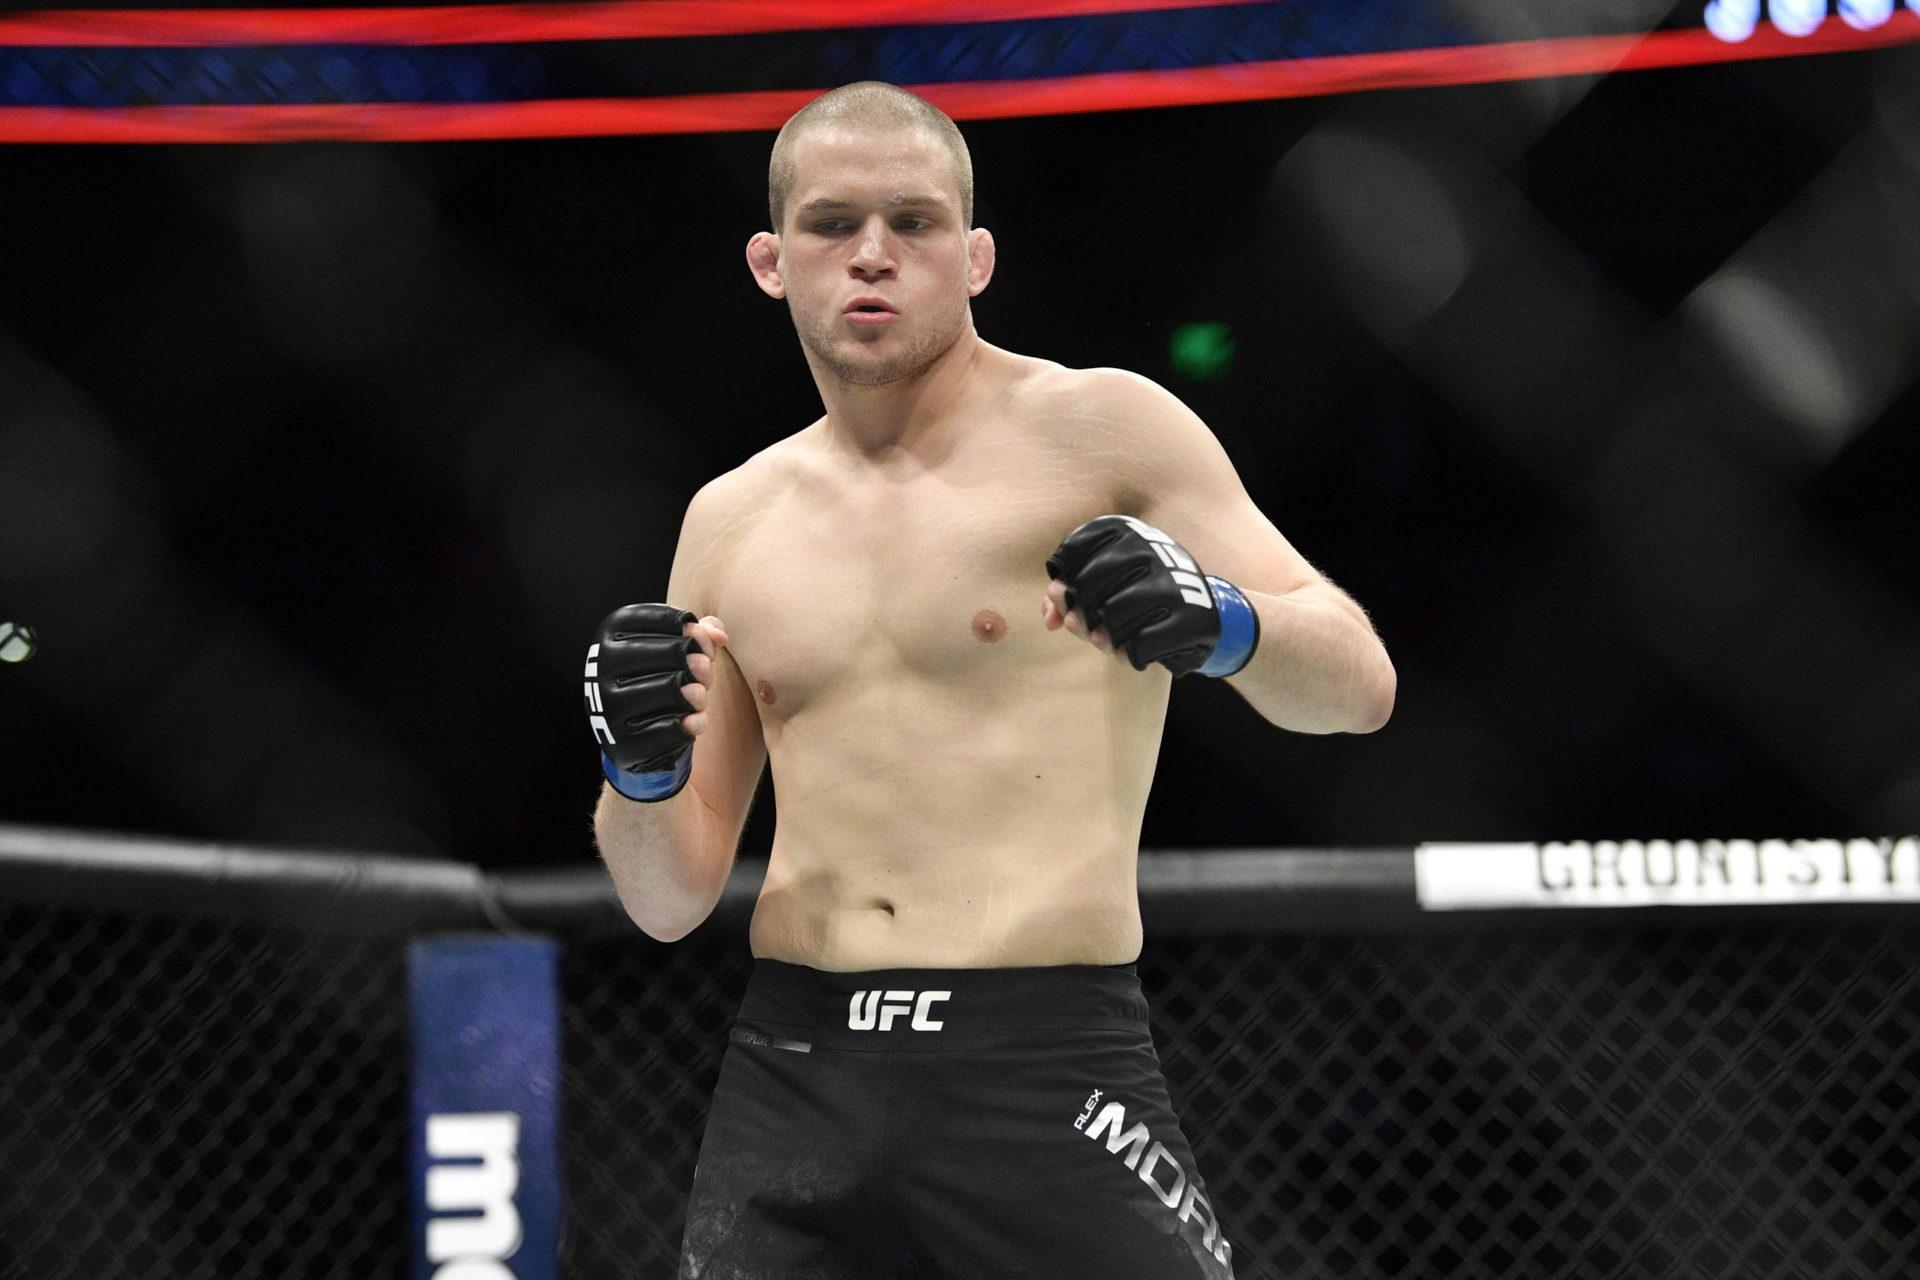 As Alex Morono Fights Mickey Gall in The UFC Welterweight Main Event, Who Will You Bet On?